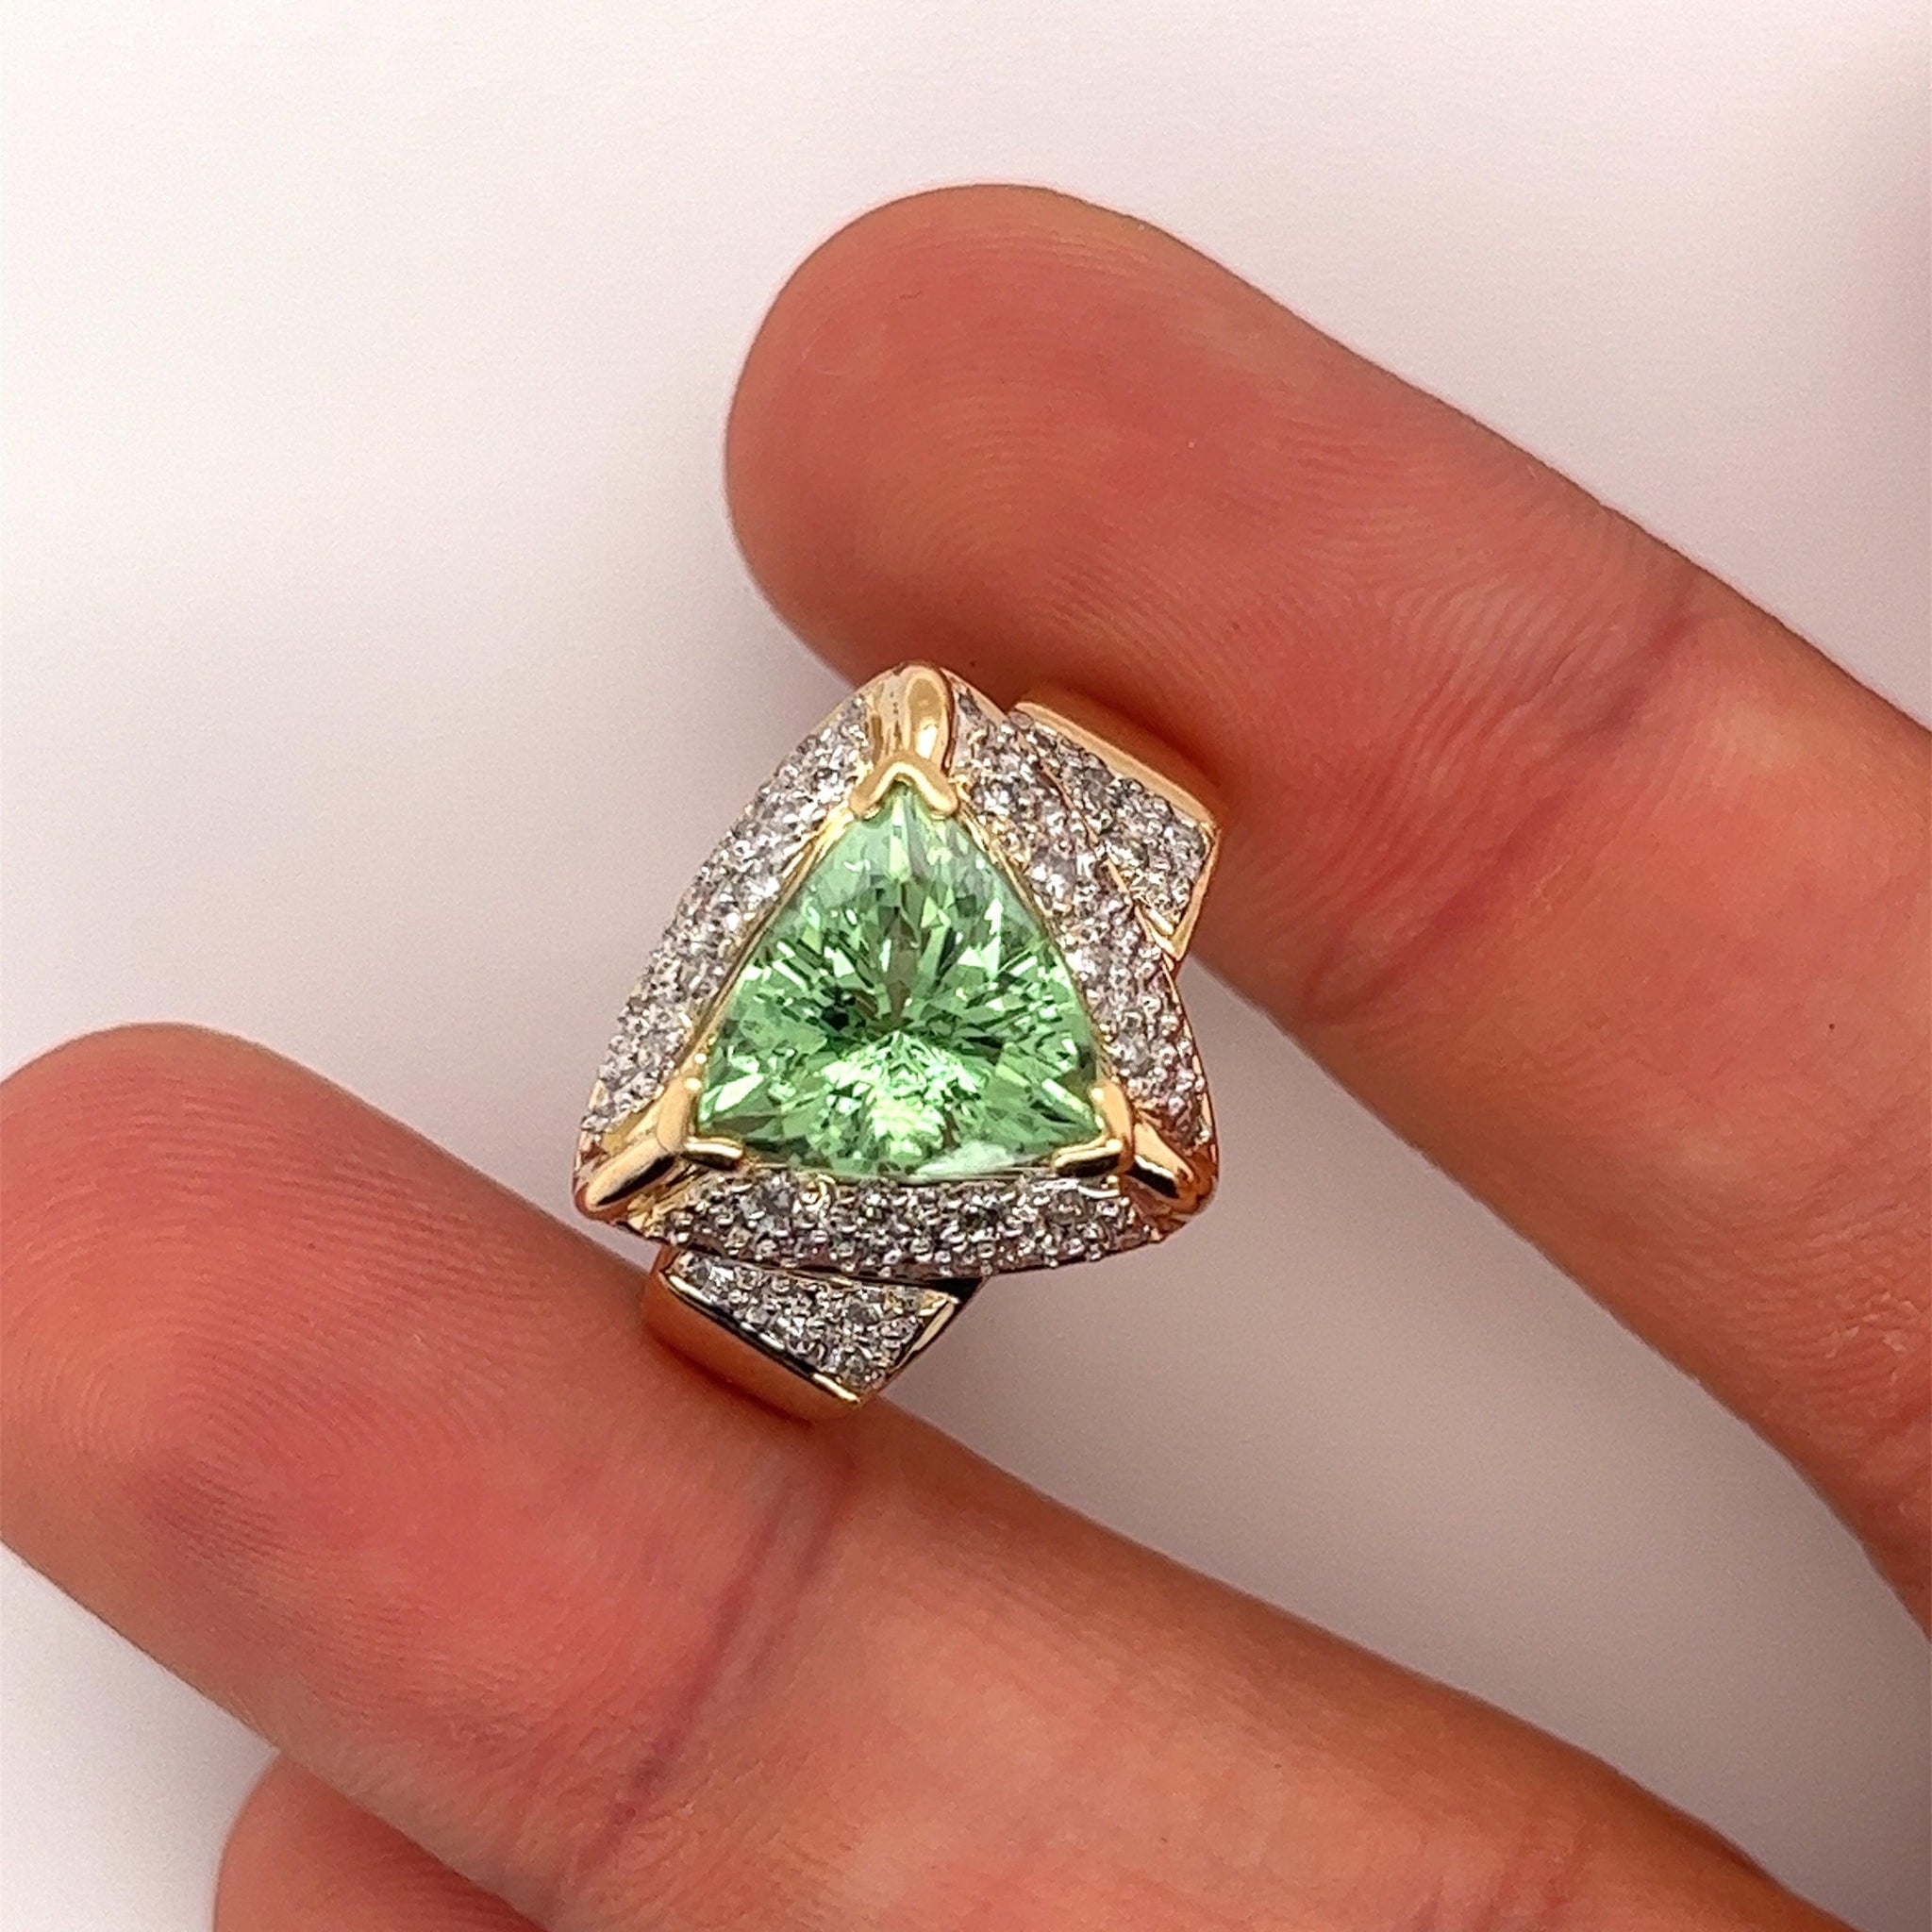 7 Carat Trilliant Cut Watermelon Green Tourmaline with Diamond Sides in 18K Gold 2 Tone Ring